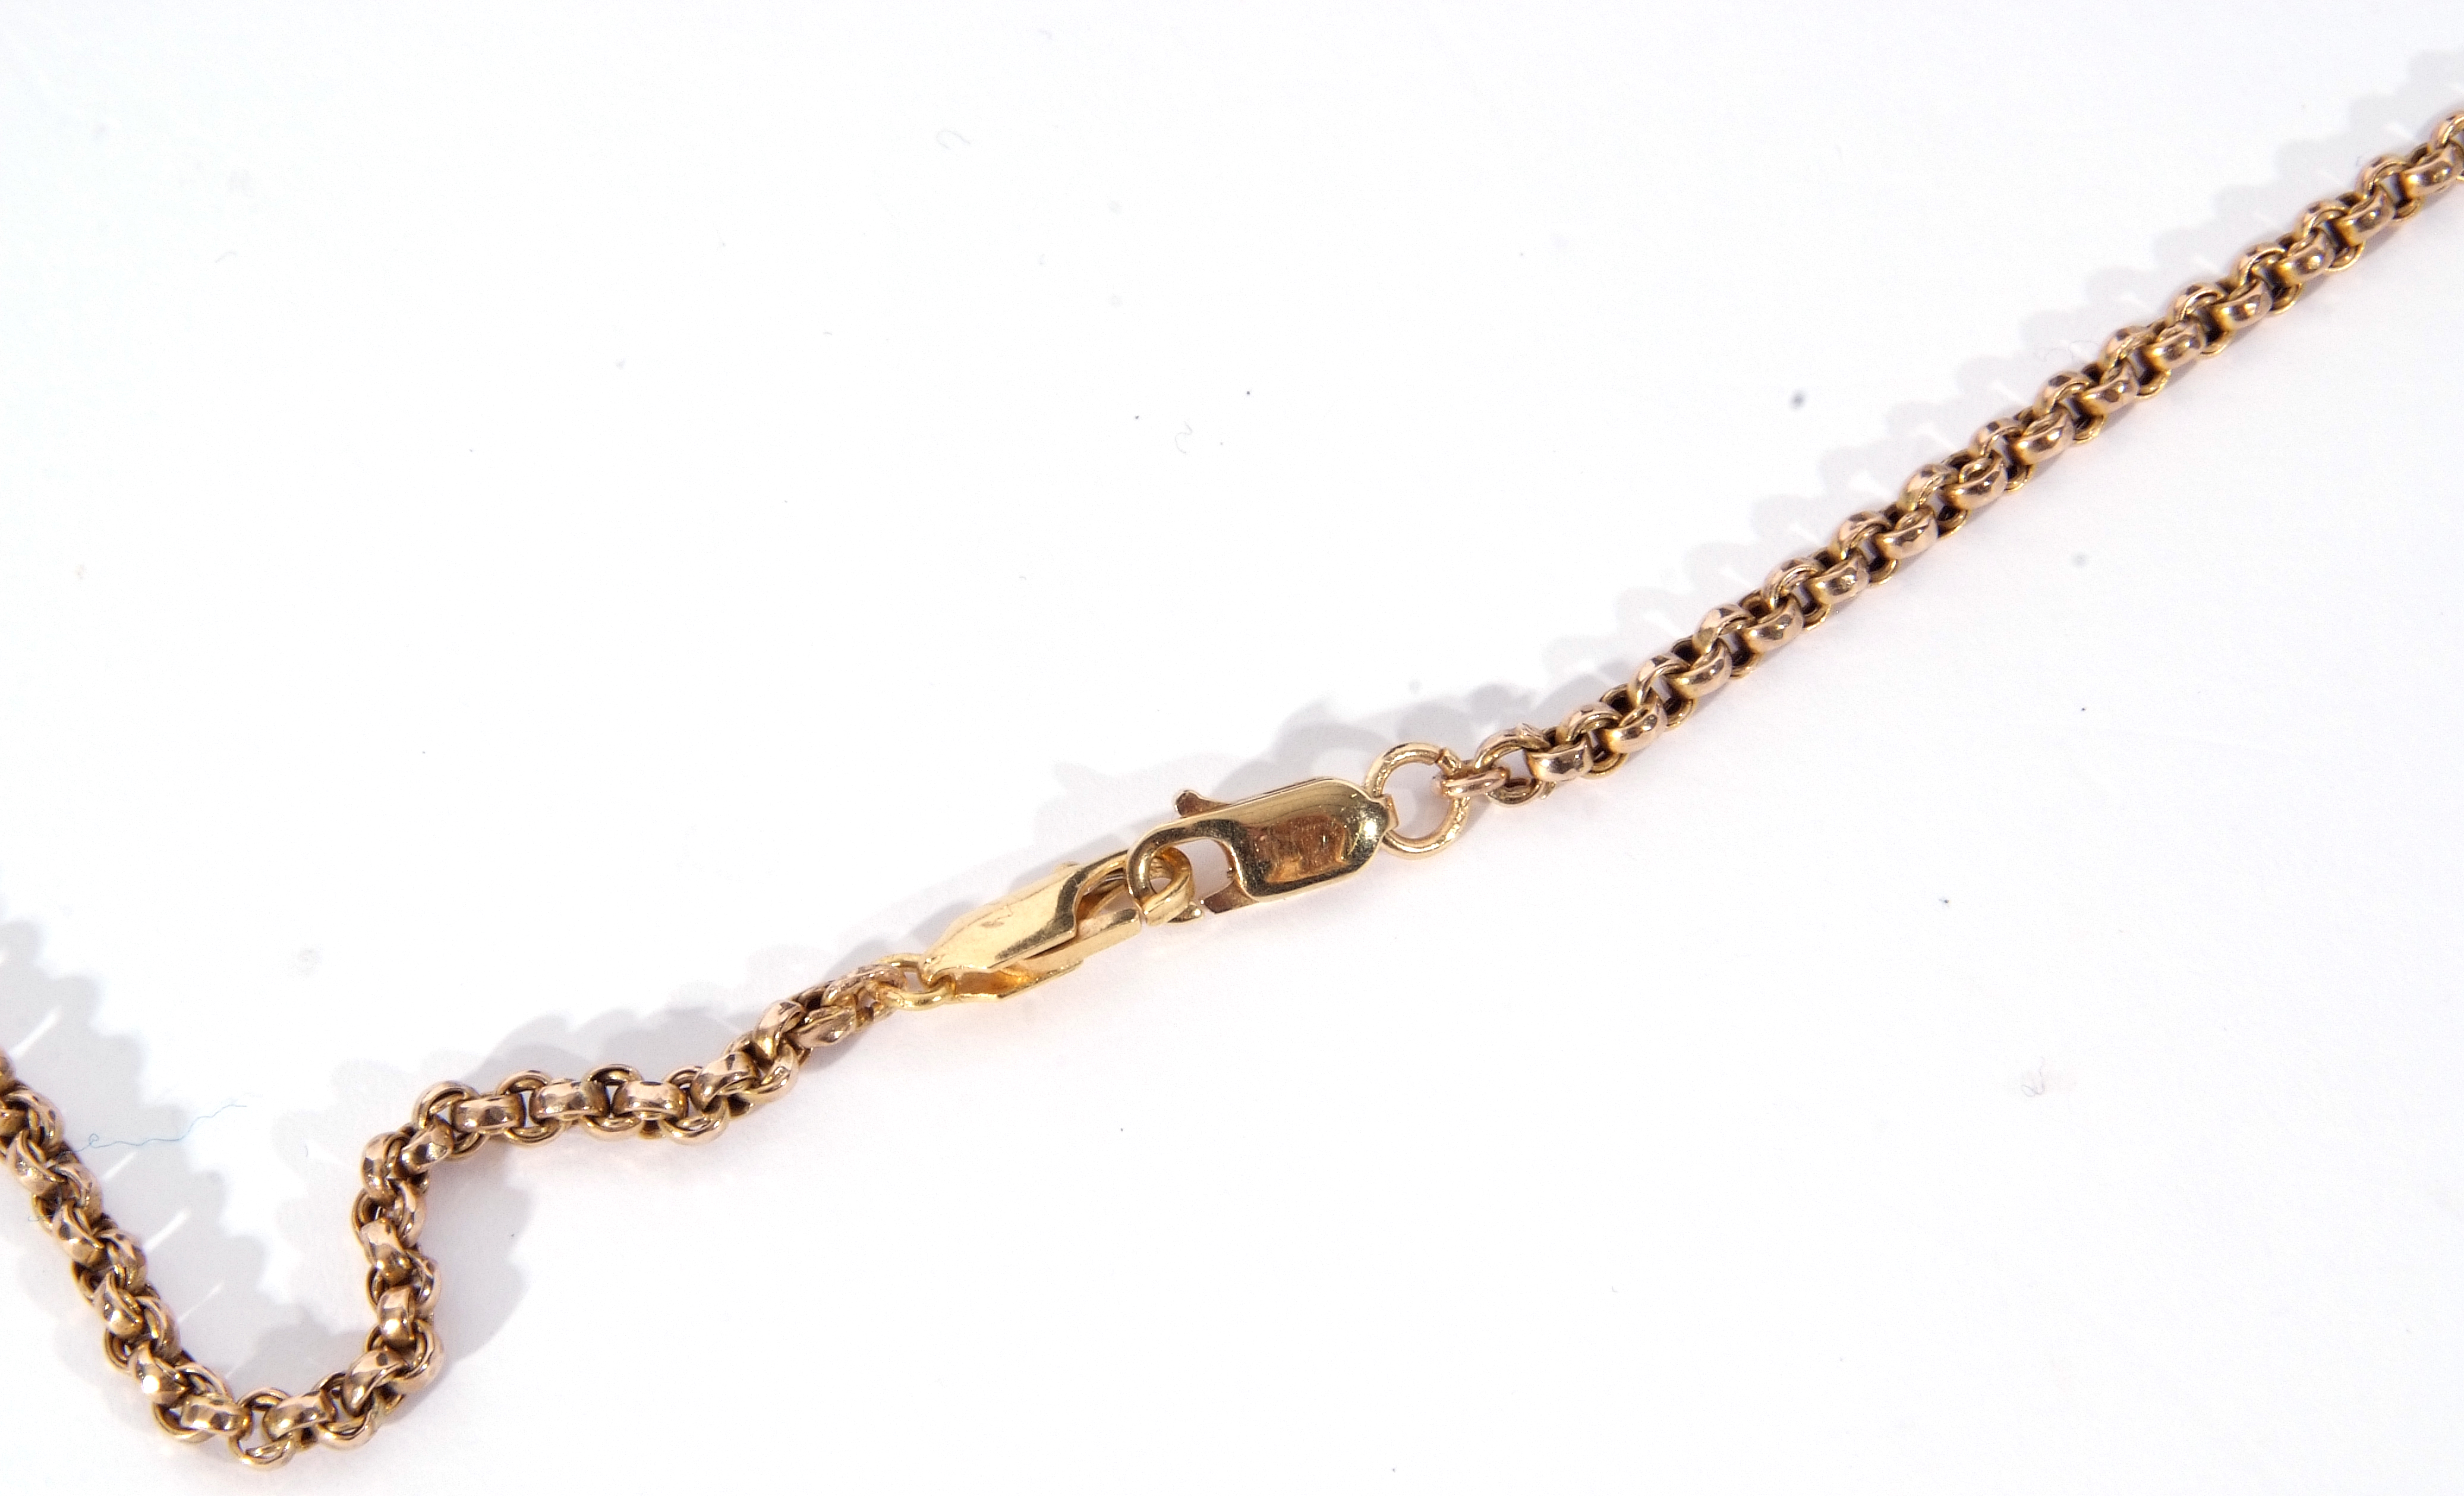 9ct stamped belcher link chain, 23cm long when fastened, with a 750 stamped lobster claw clasp, g/ - Image 2 of 3